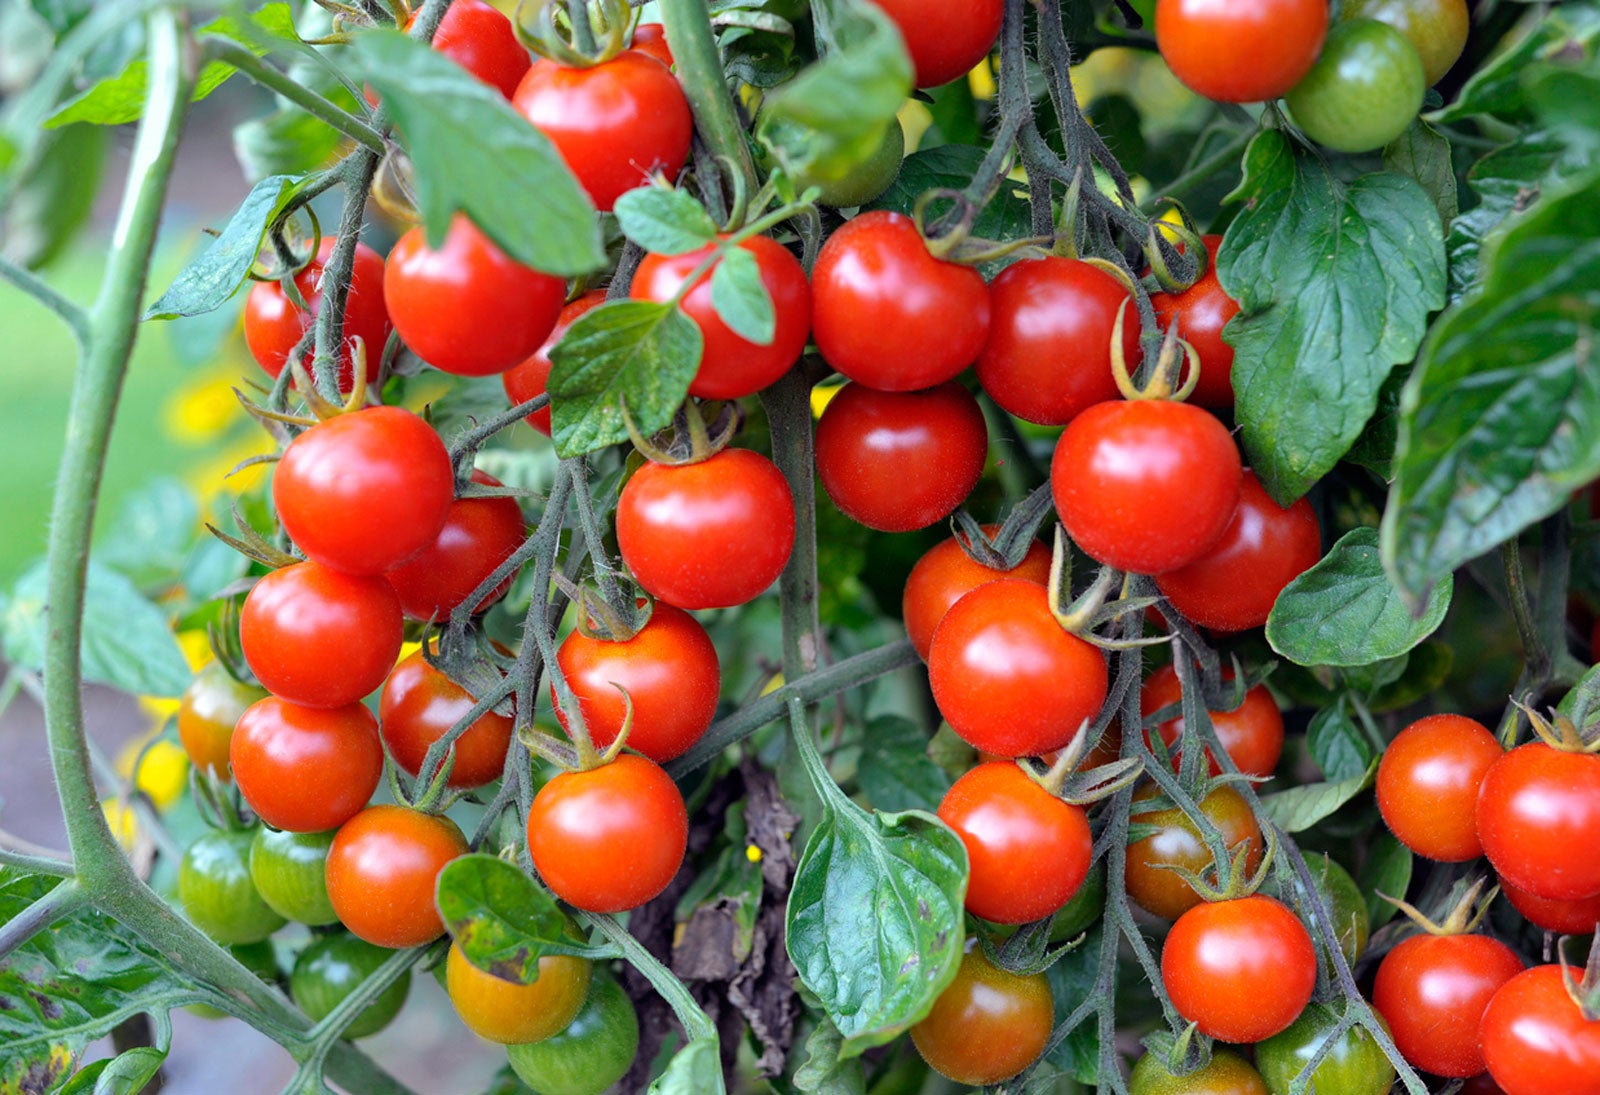 Tomato Plant Growing Guides, Tips, and Information